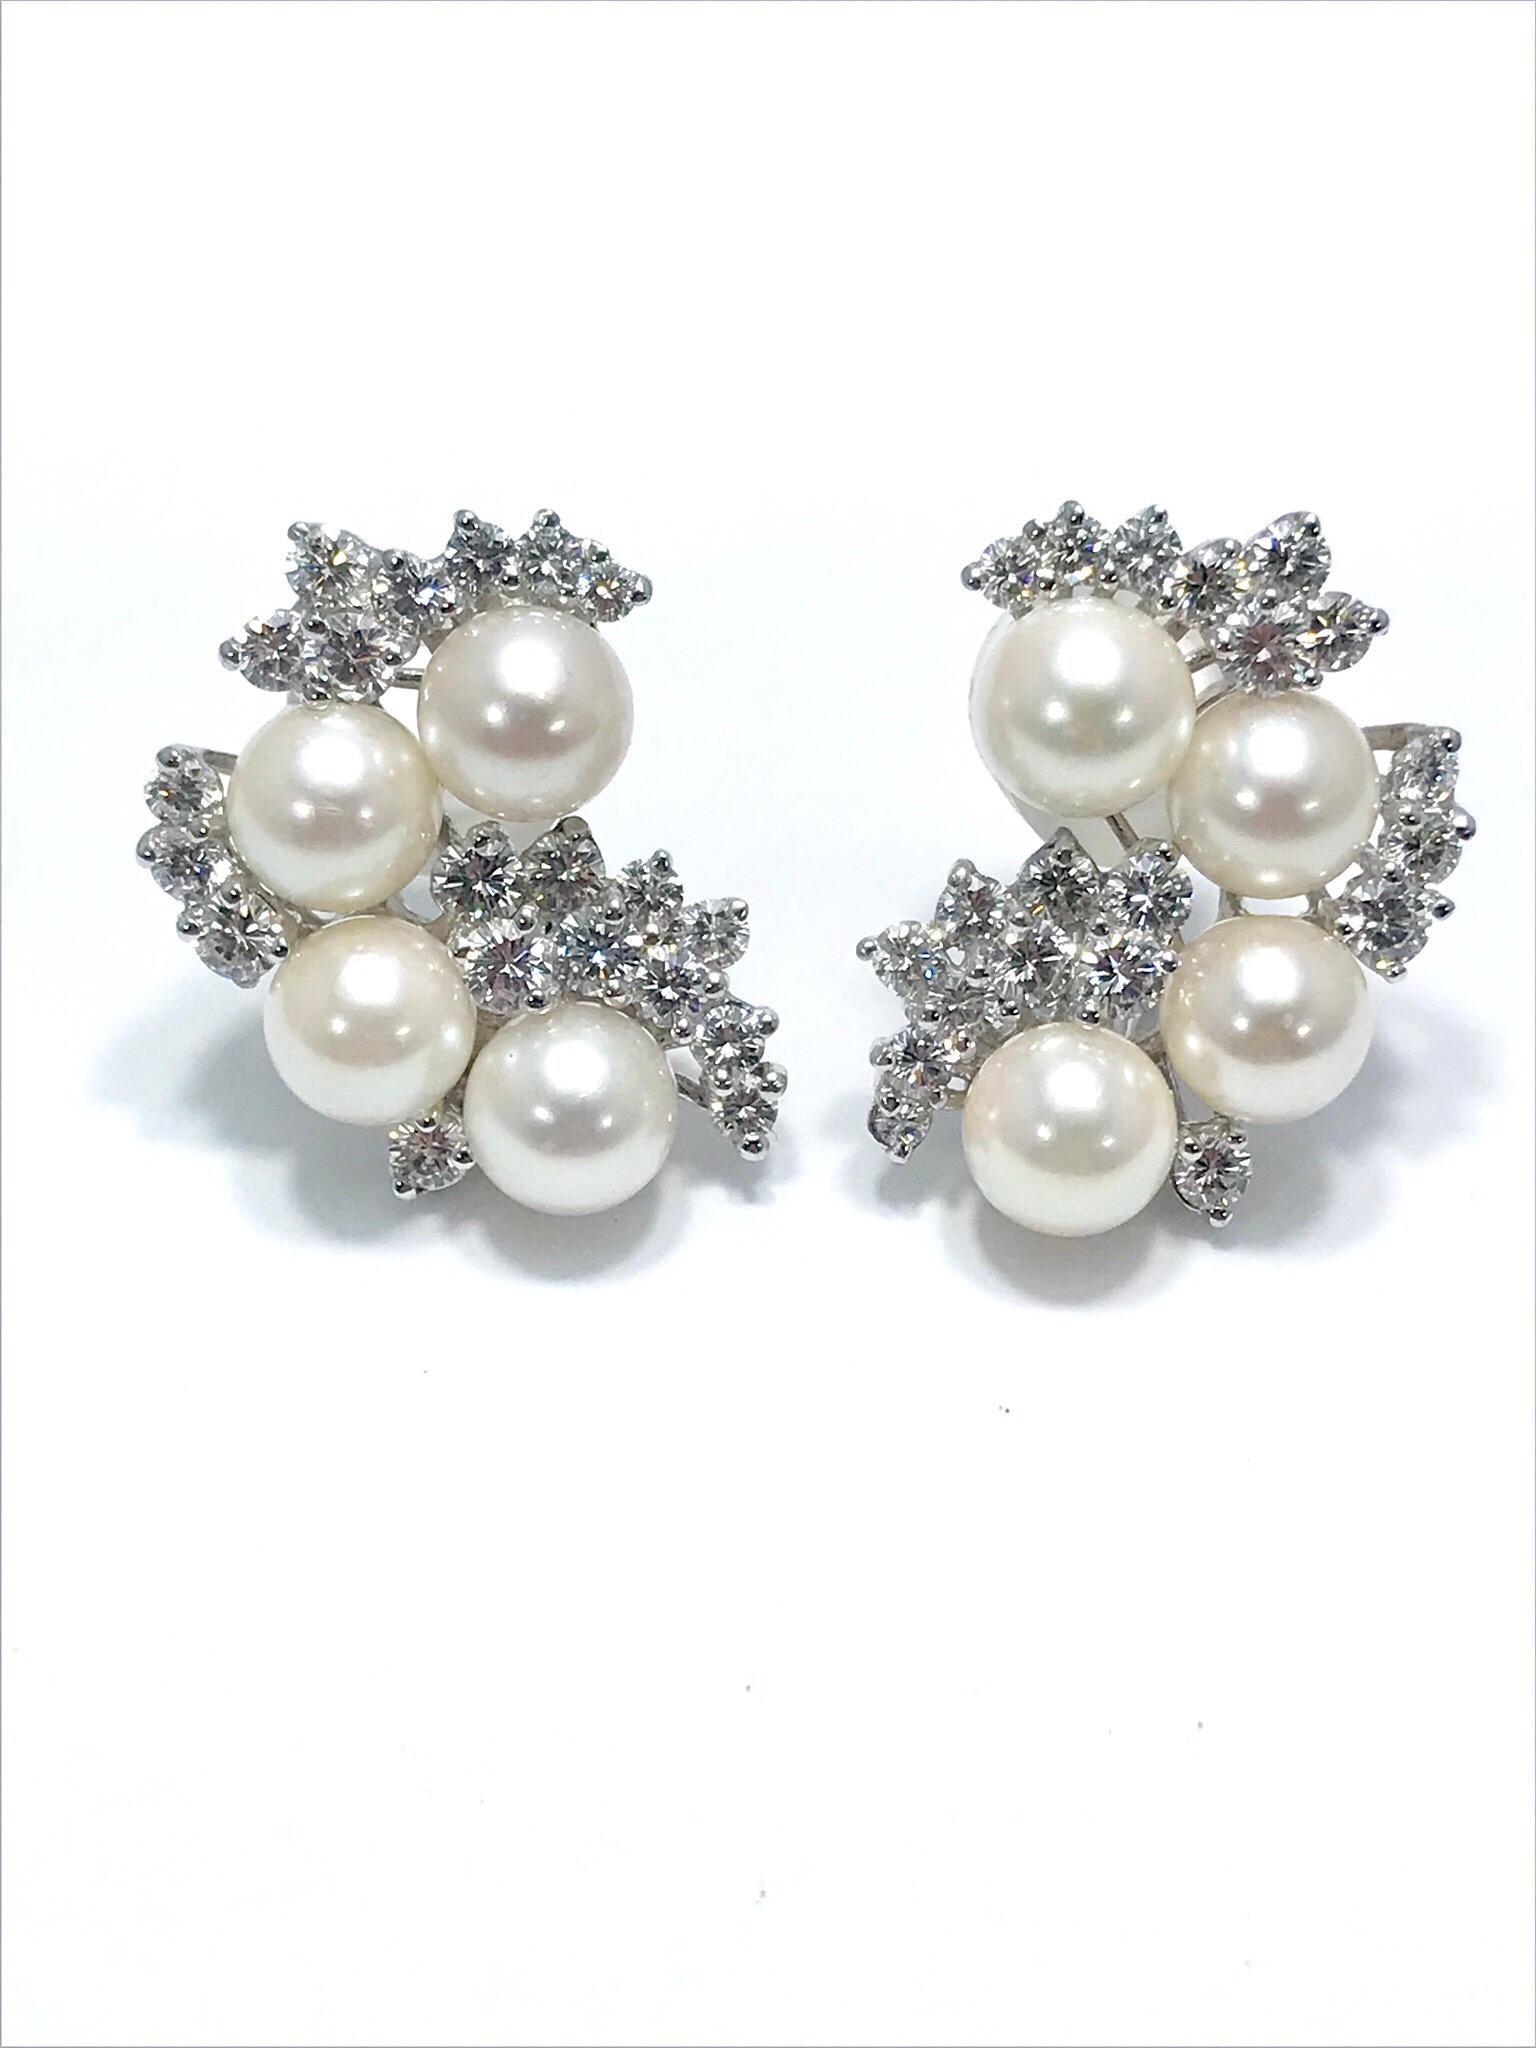 A very elegant 5.00 carat Diamond and Cultured Pearl platinum clip earrings.  The Diamonds are very fine modern round brilliant cuts, F/G color, VS clarity.  The Cultured Pearls measure 7.00 - 7.50 millimeters and have a beautiful luster.  The